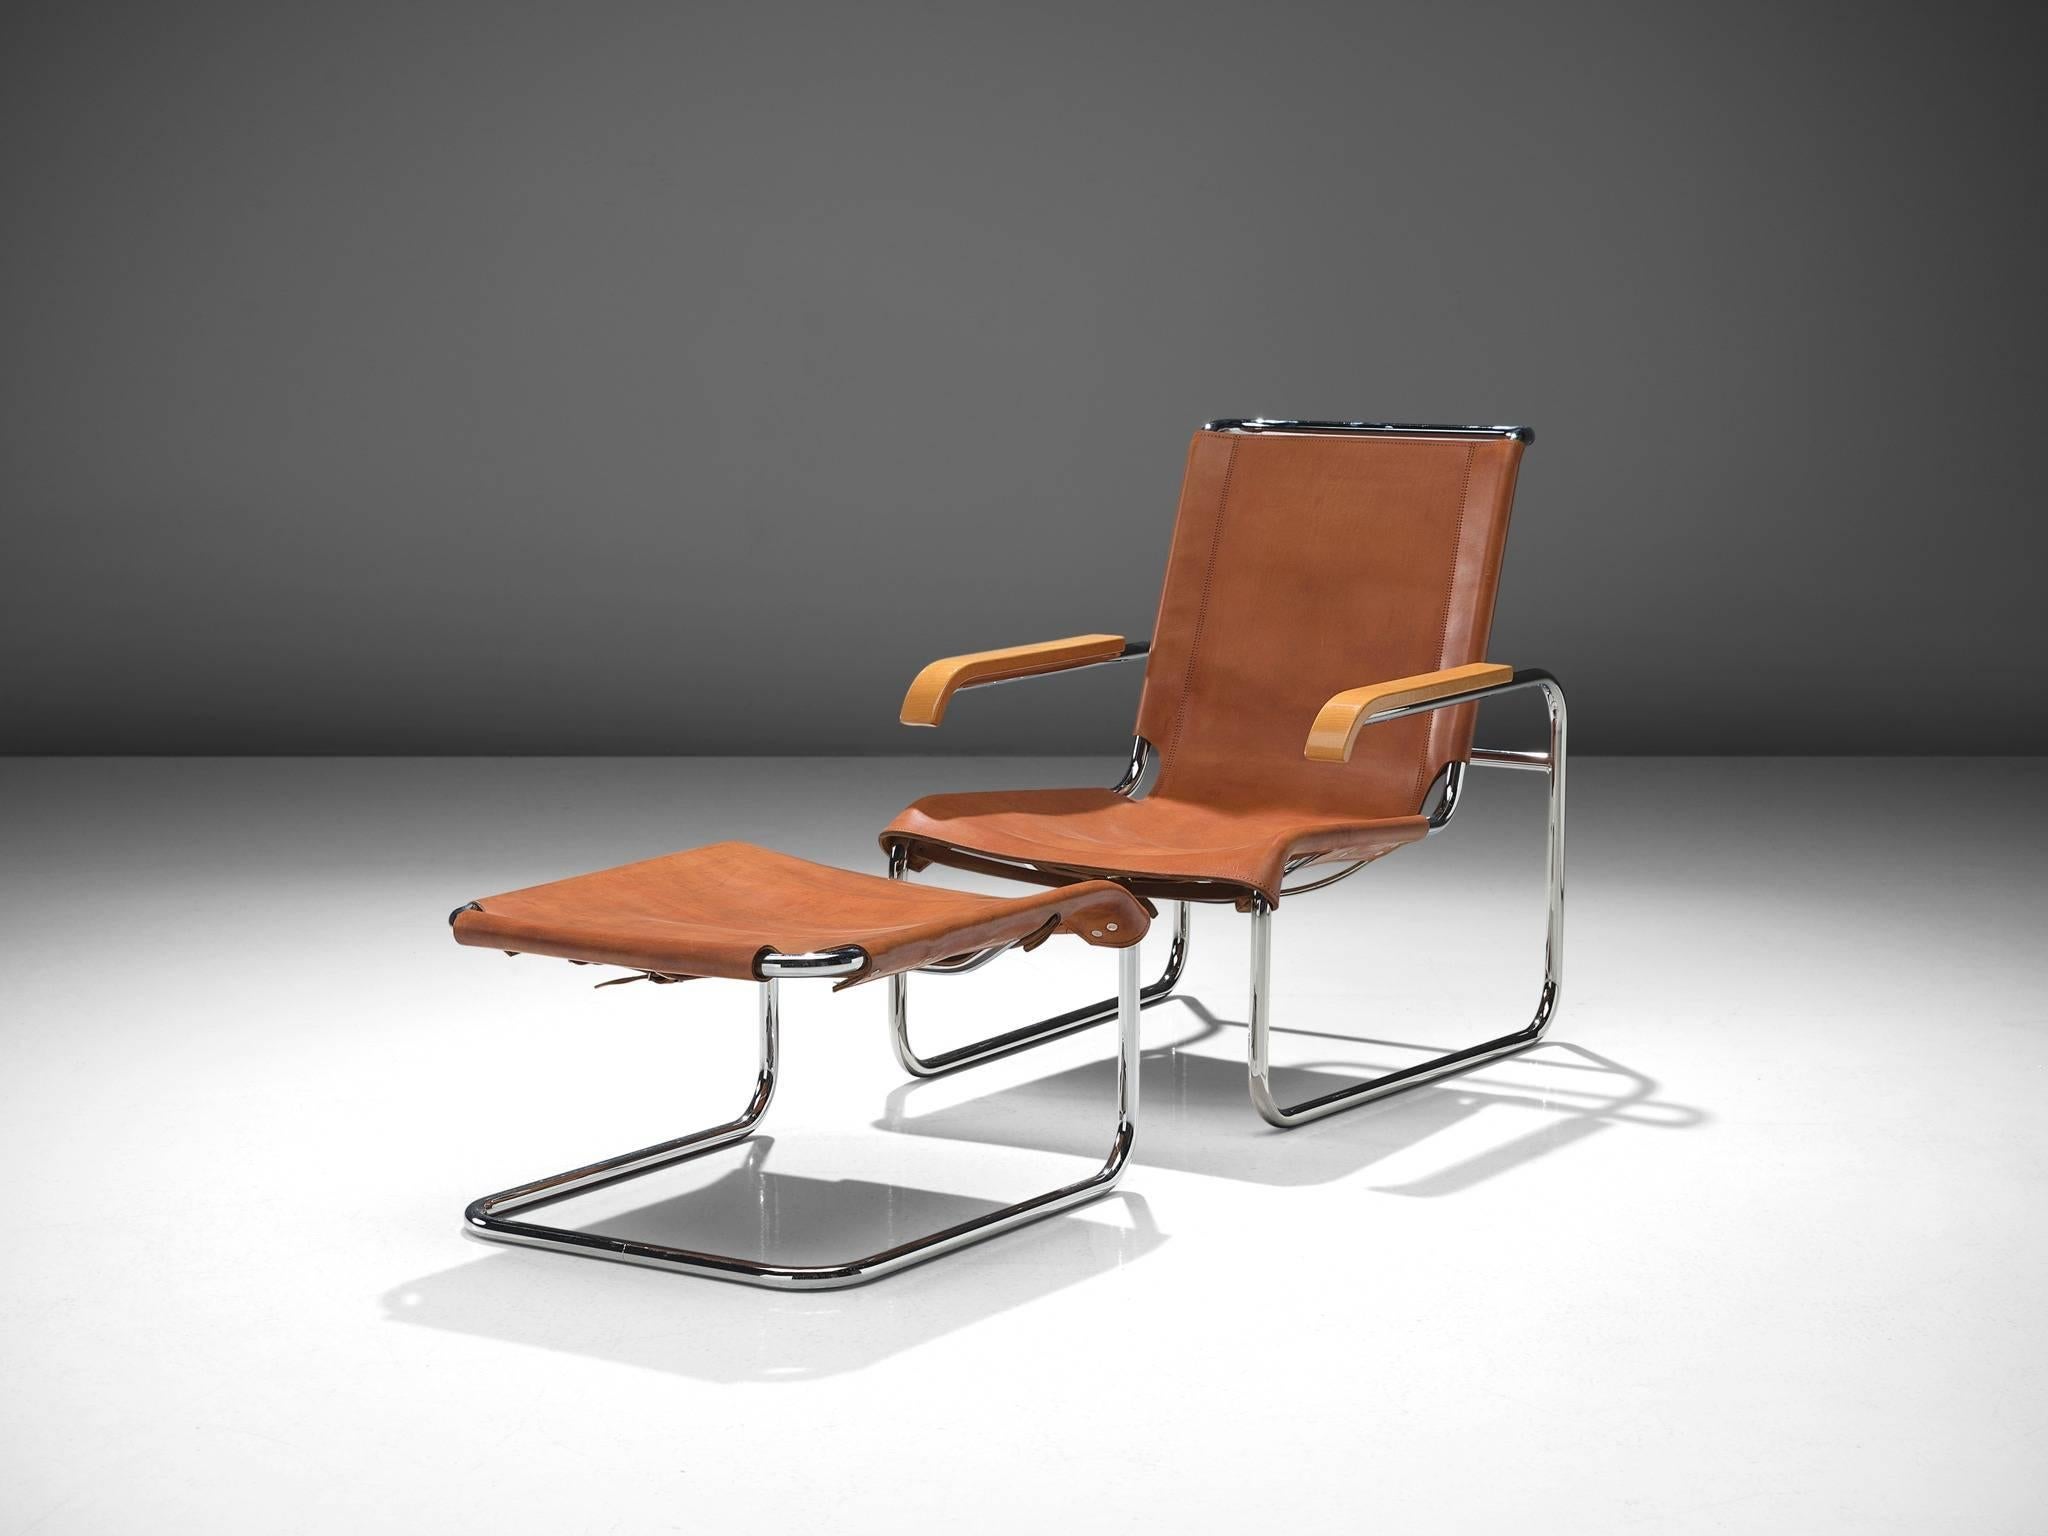 Marcel Breuer for Thonet, lounge chair B35 with ottoman, leather and tubular steel by Germany, 1928. 

This lounge chair is executed in cognac leather and tubular steel. The B35 by Marcel Breuer exists of a cantilevered chair and matching ottoman.